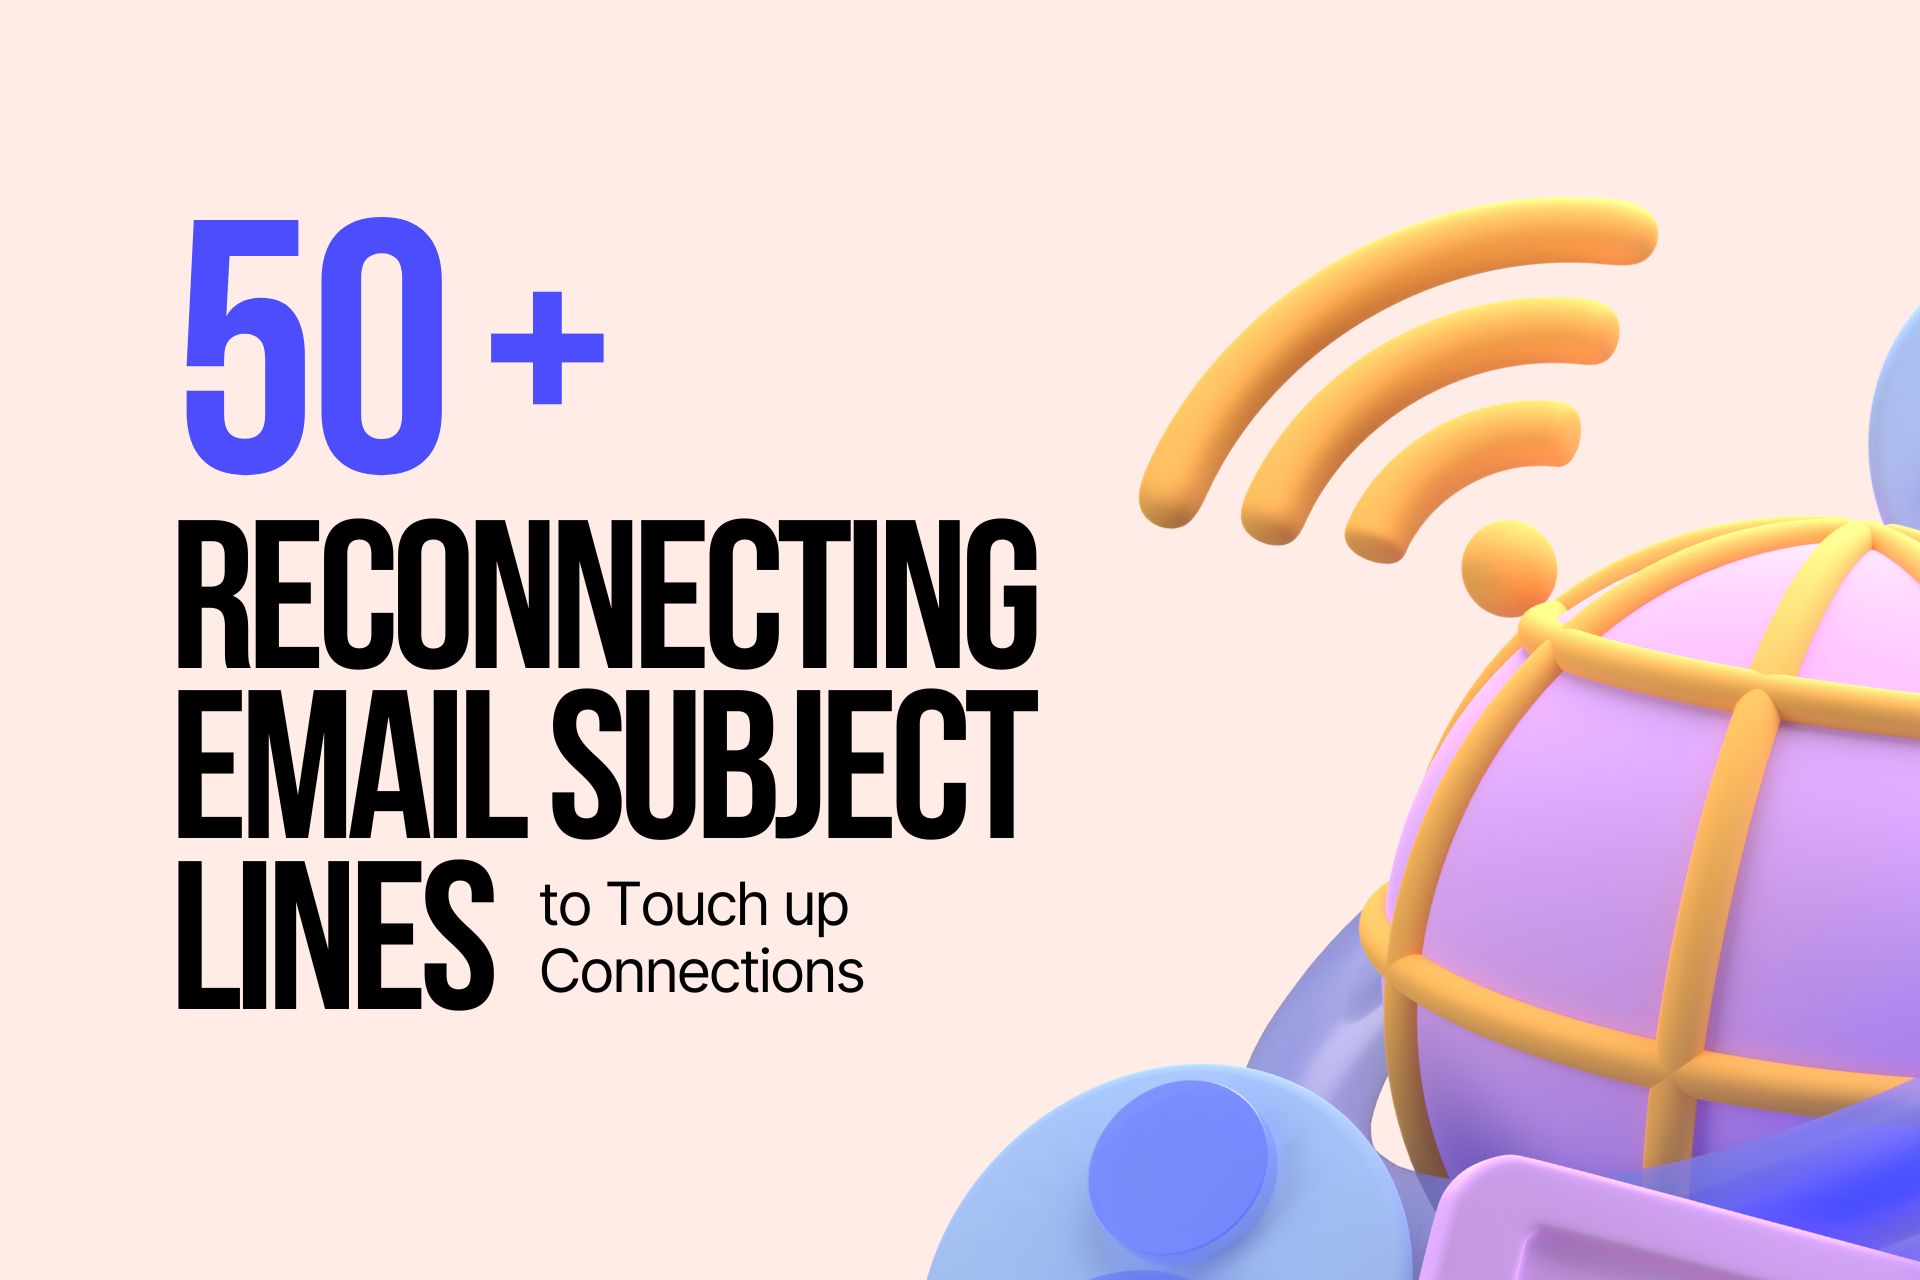 50+ Reconnecting Email Subject Lines to Touch up Connections